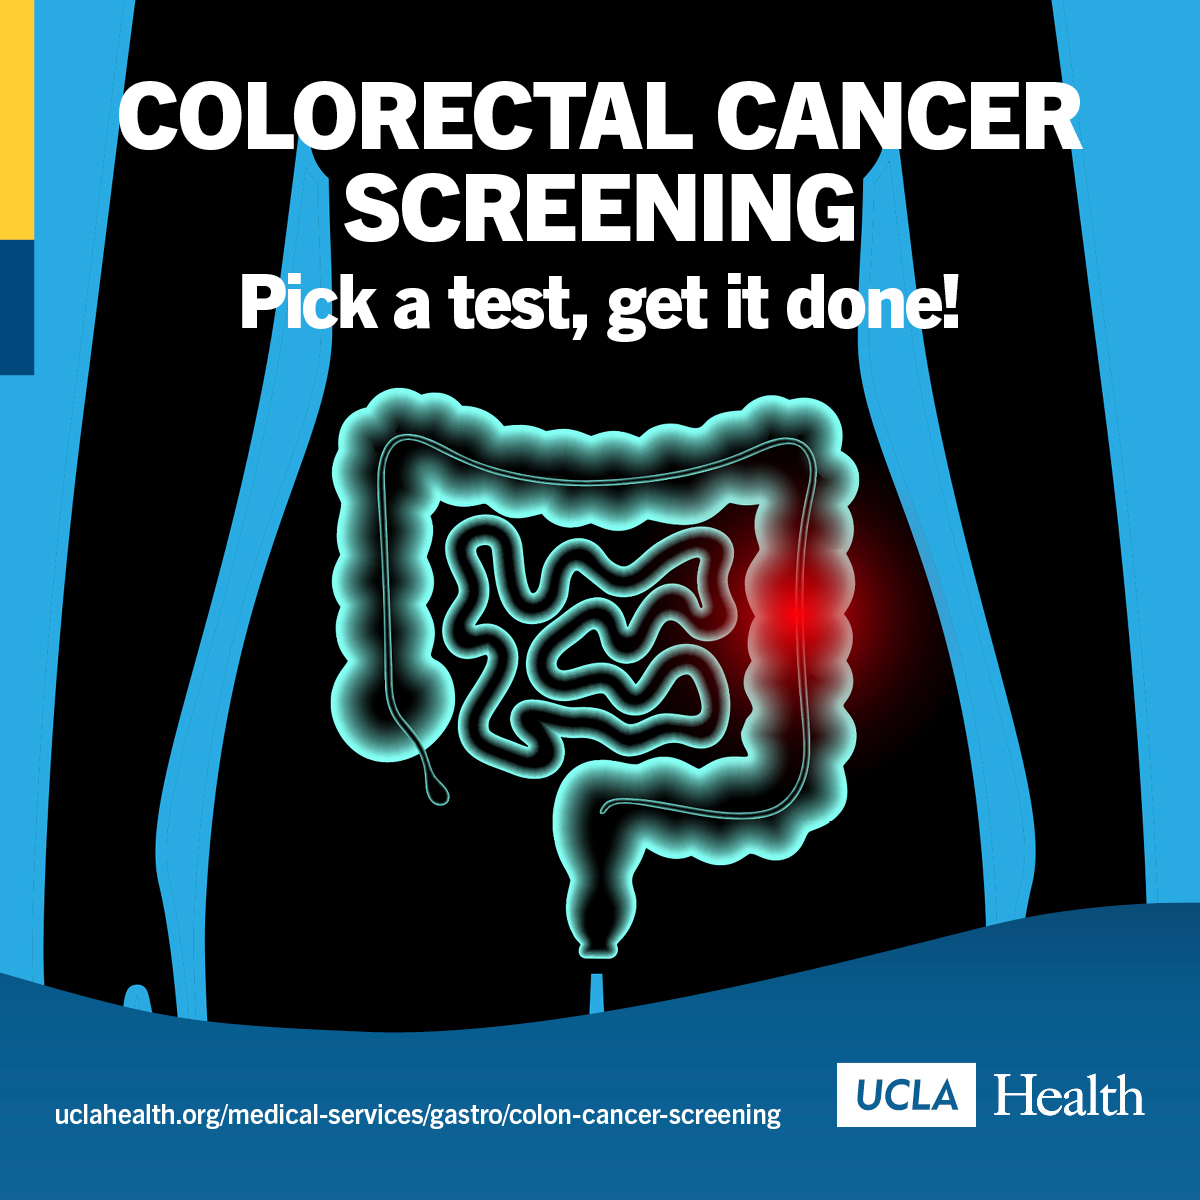 It's National Colorectal Cancer Awareness Month! Remember that colorectal cancer screening now  starts at age 45 and there are lots of options.  Learn more at bit.ly/2GEYId4 and spread the word! #CRC #ColorectalCancerScreening #GetScreened